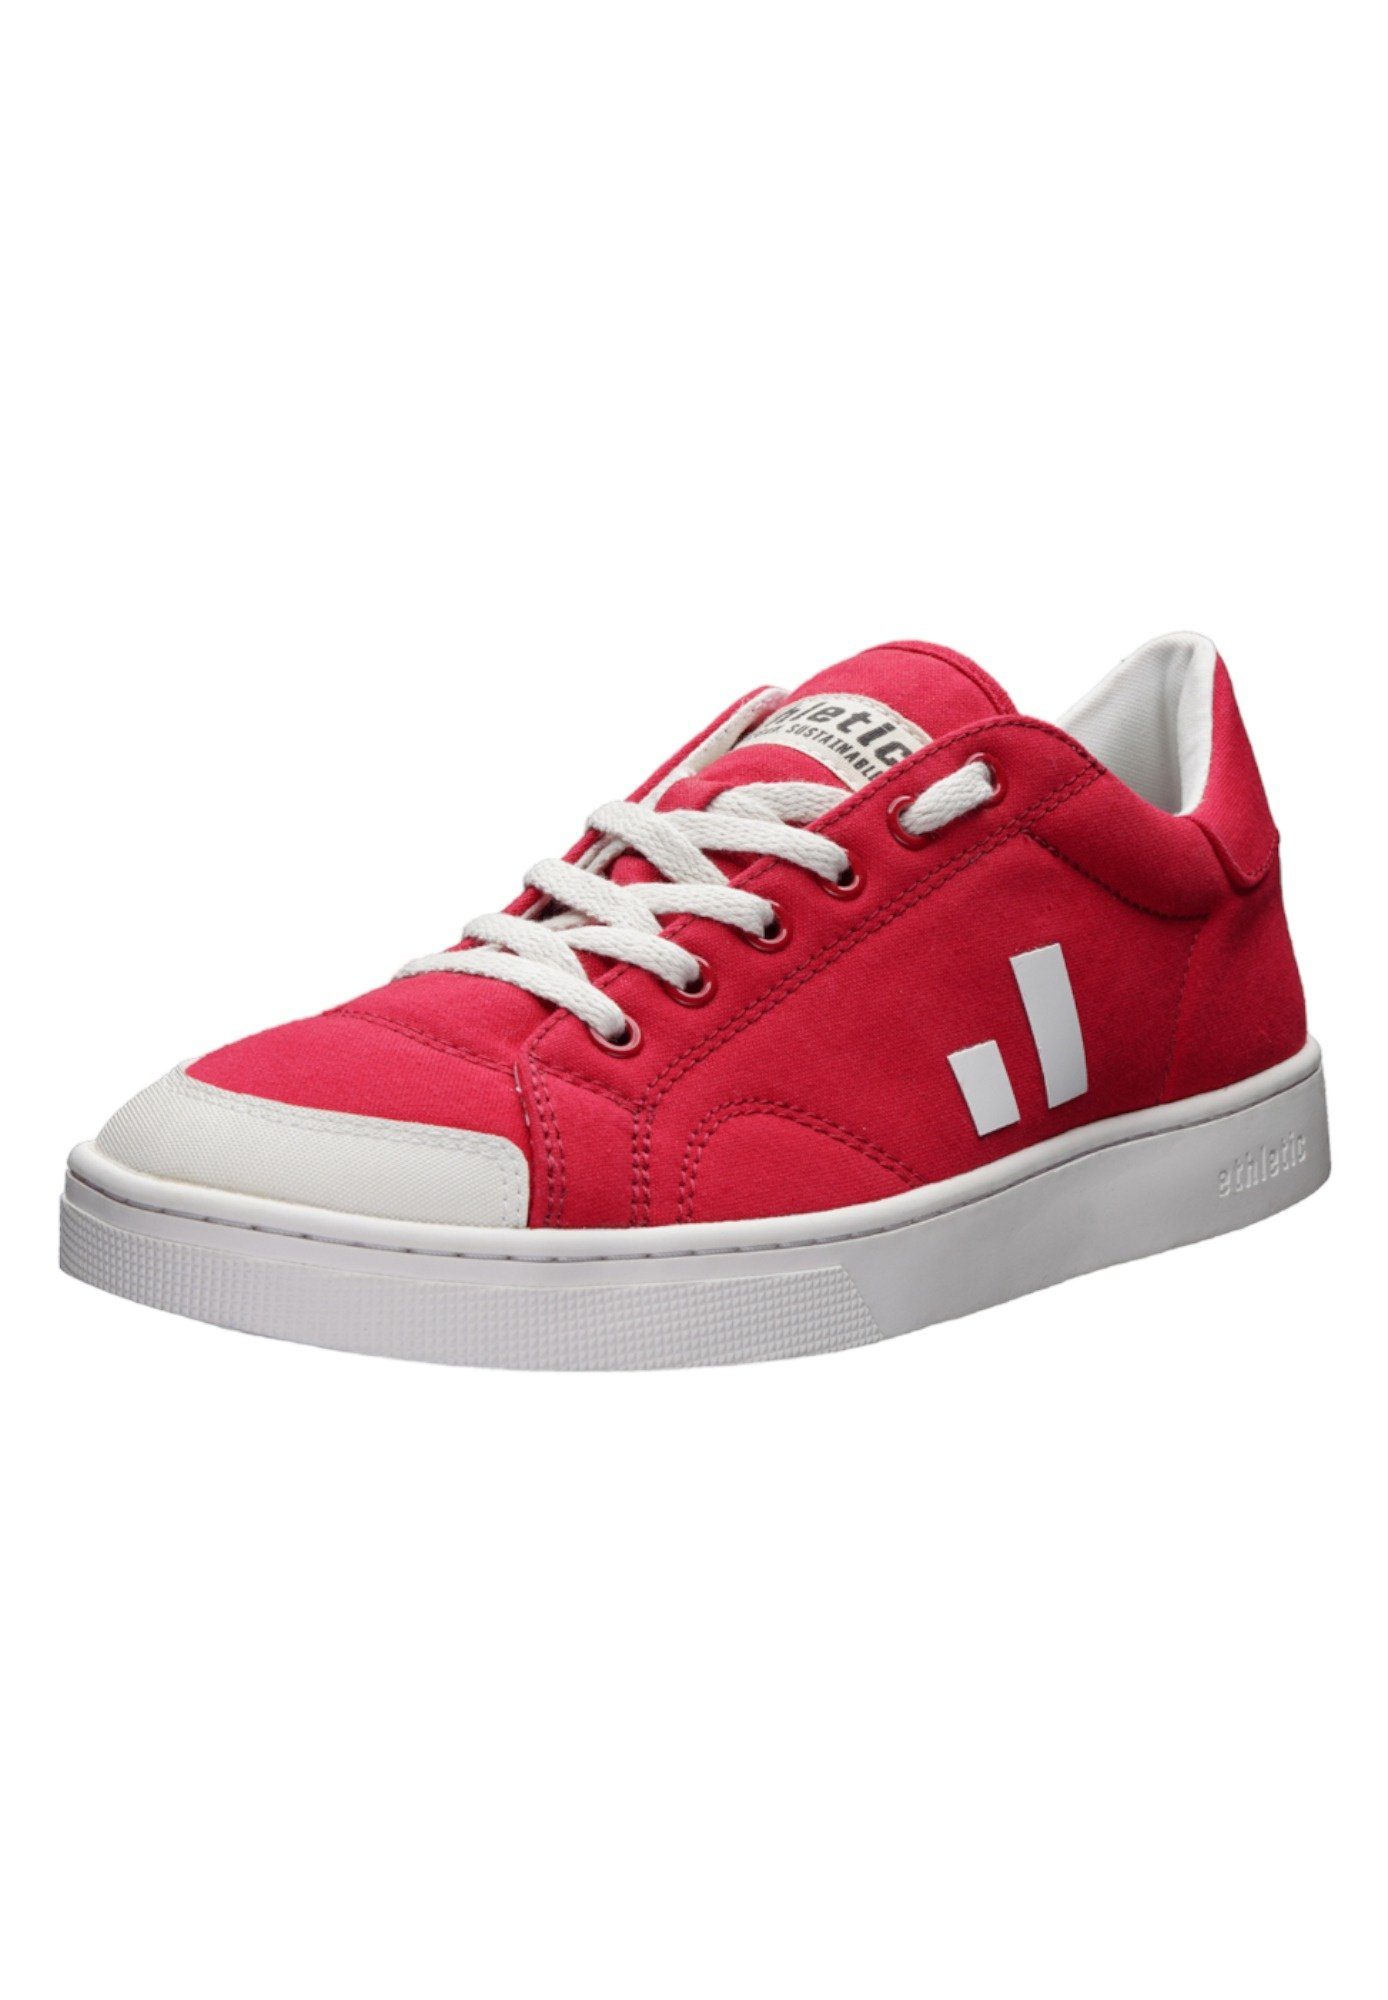 ETHLETIC Active Lo Cut Sneaker Fairtrade Produkt Cranberry Red - Just White